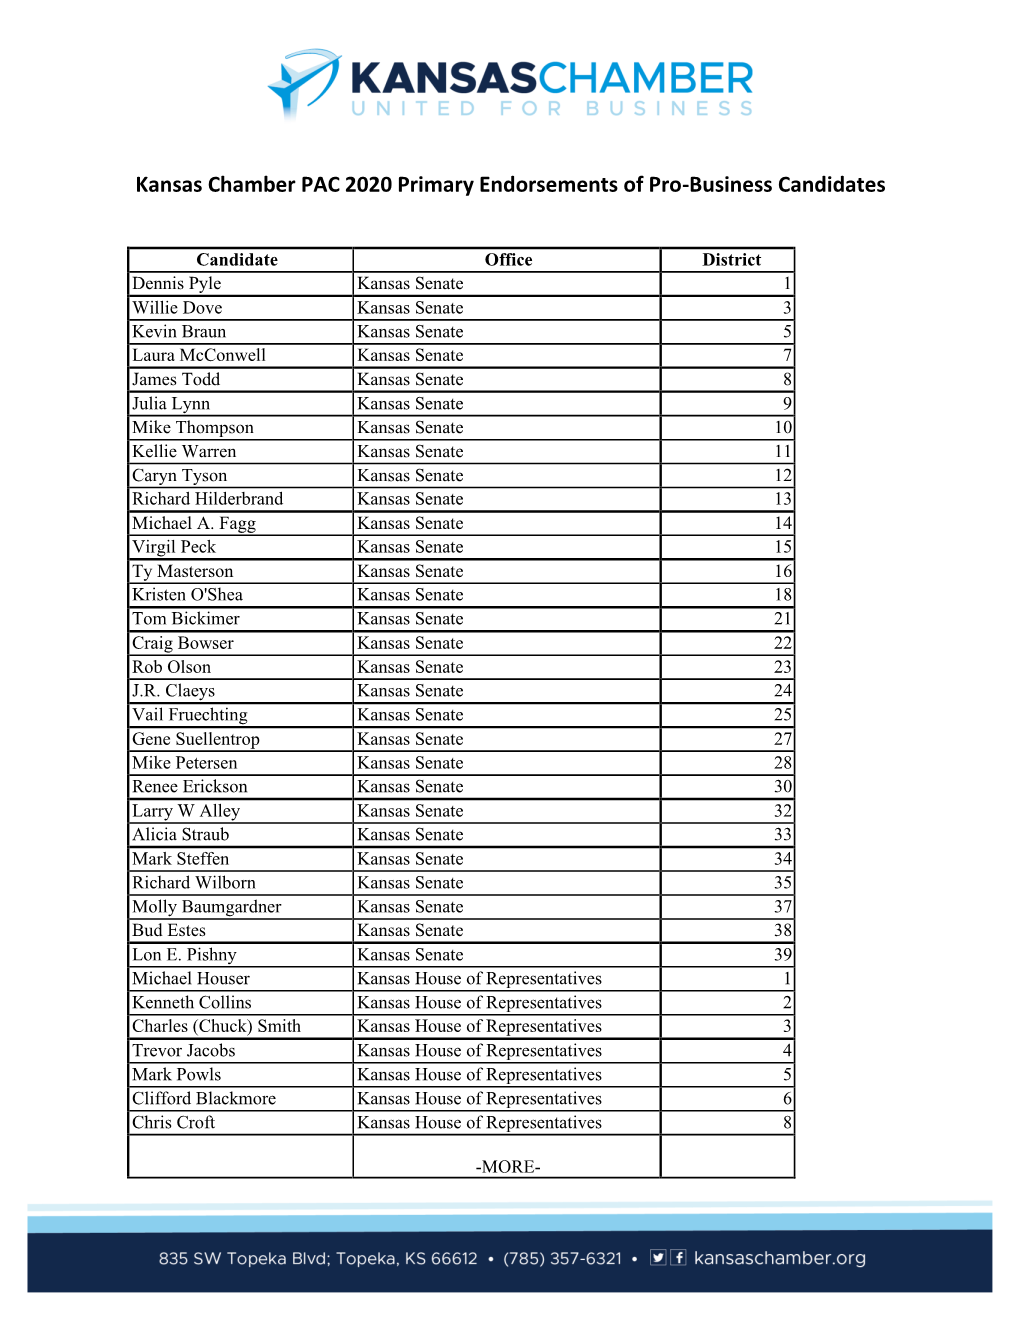 Kansas Chamber PAC 2020 Primary Endorsements of Pro-Business Candidates